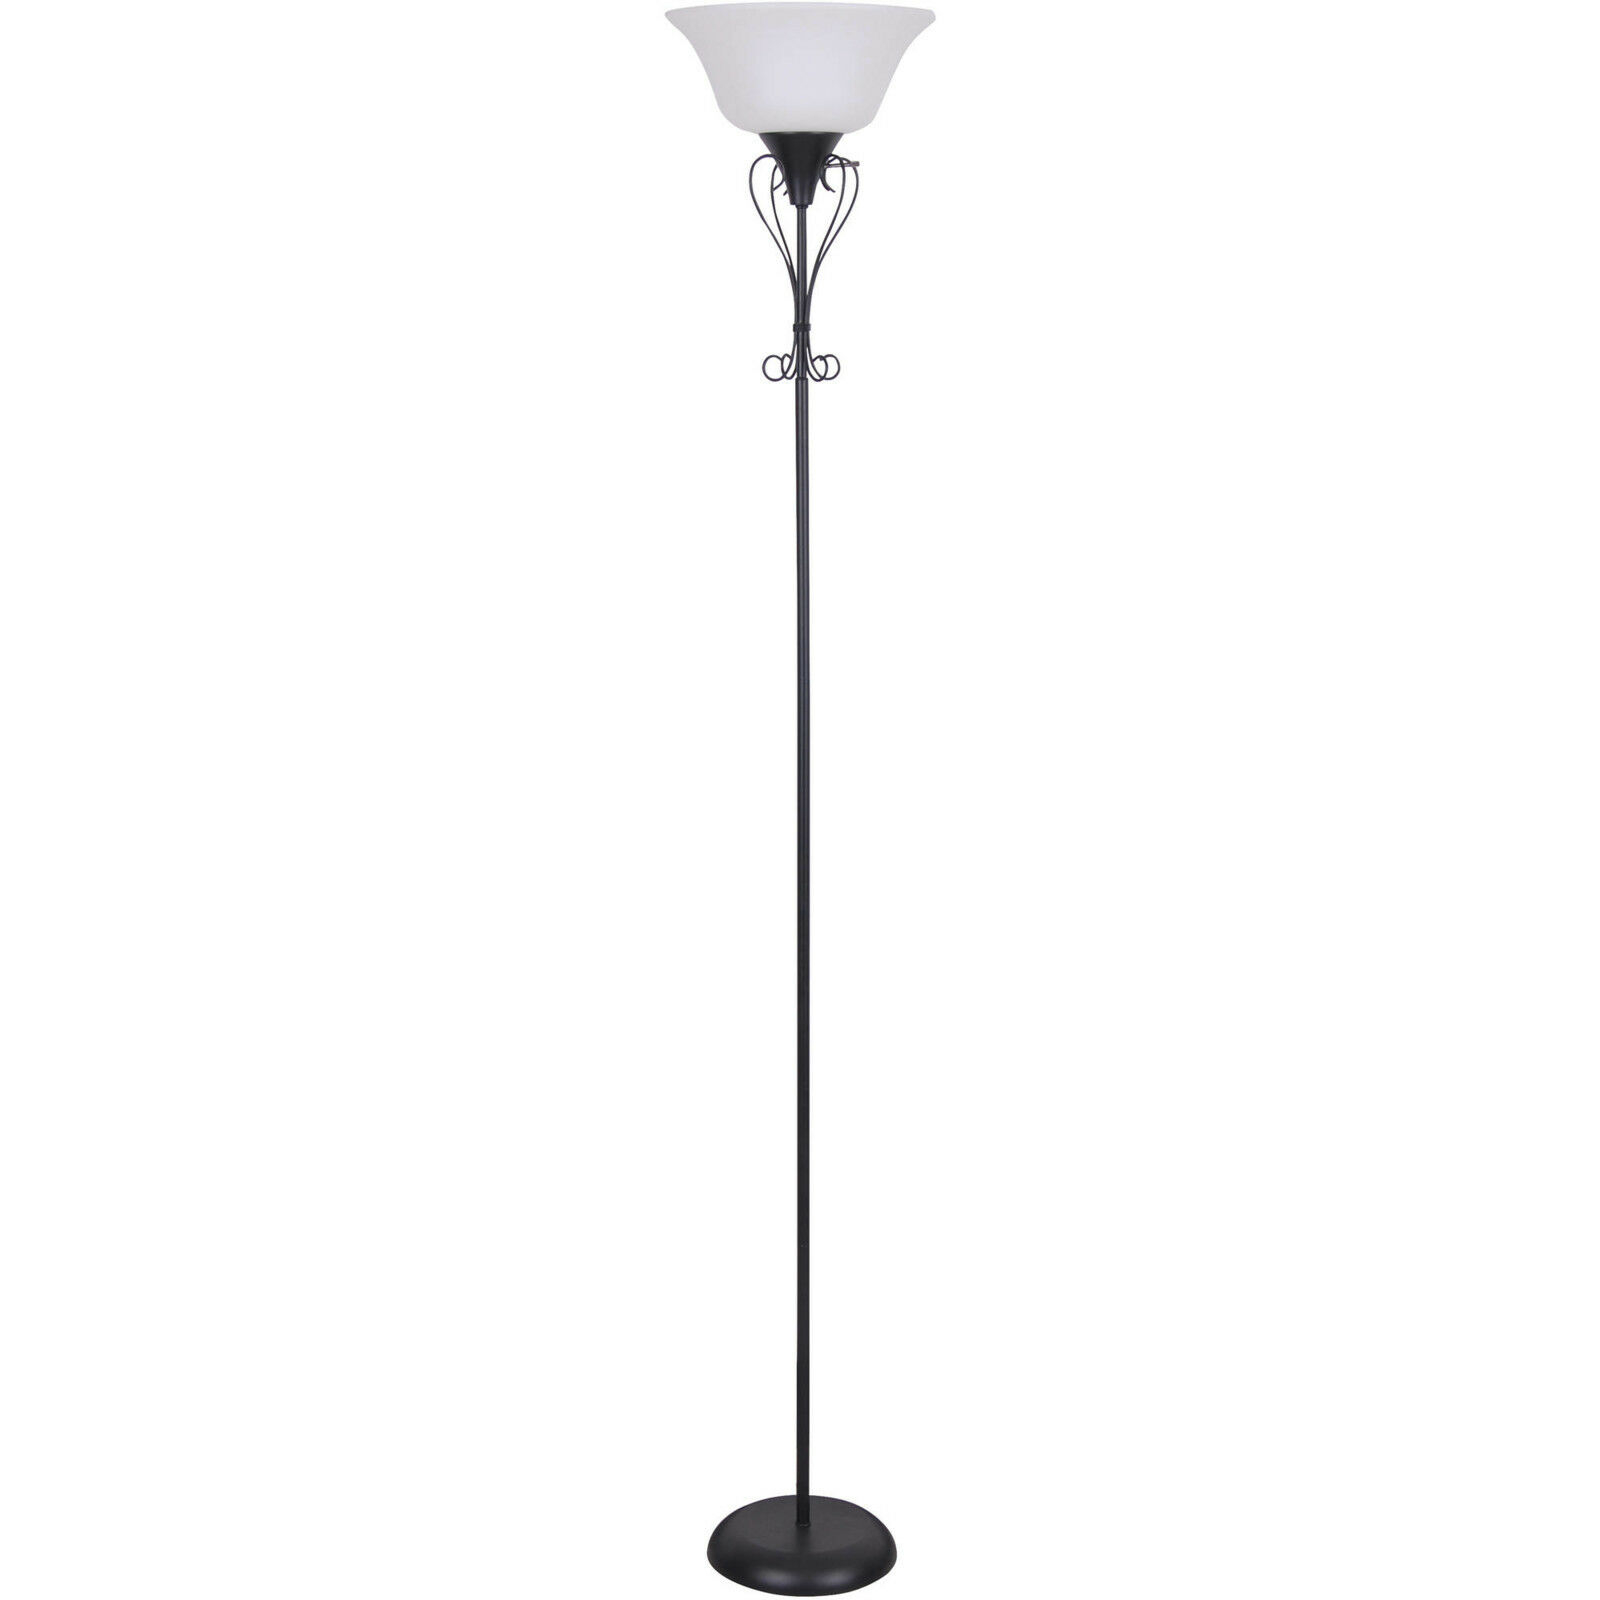 Mainstays 71 Scroll Floor Lamp Black Finish Cfl Bulb Included throughout size 1600 X 1600